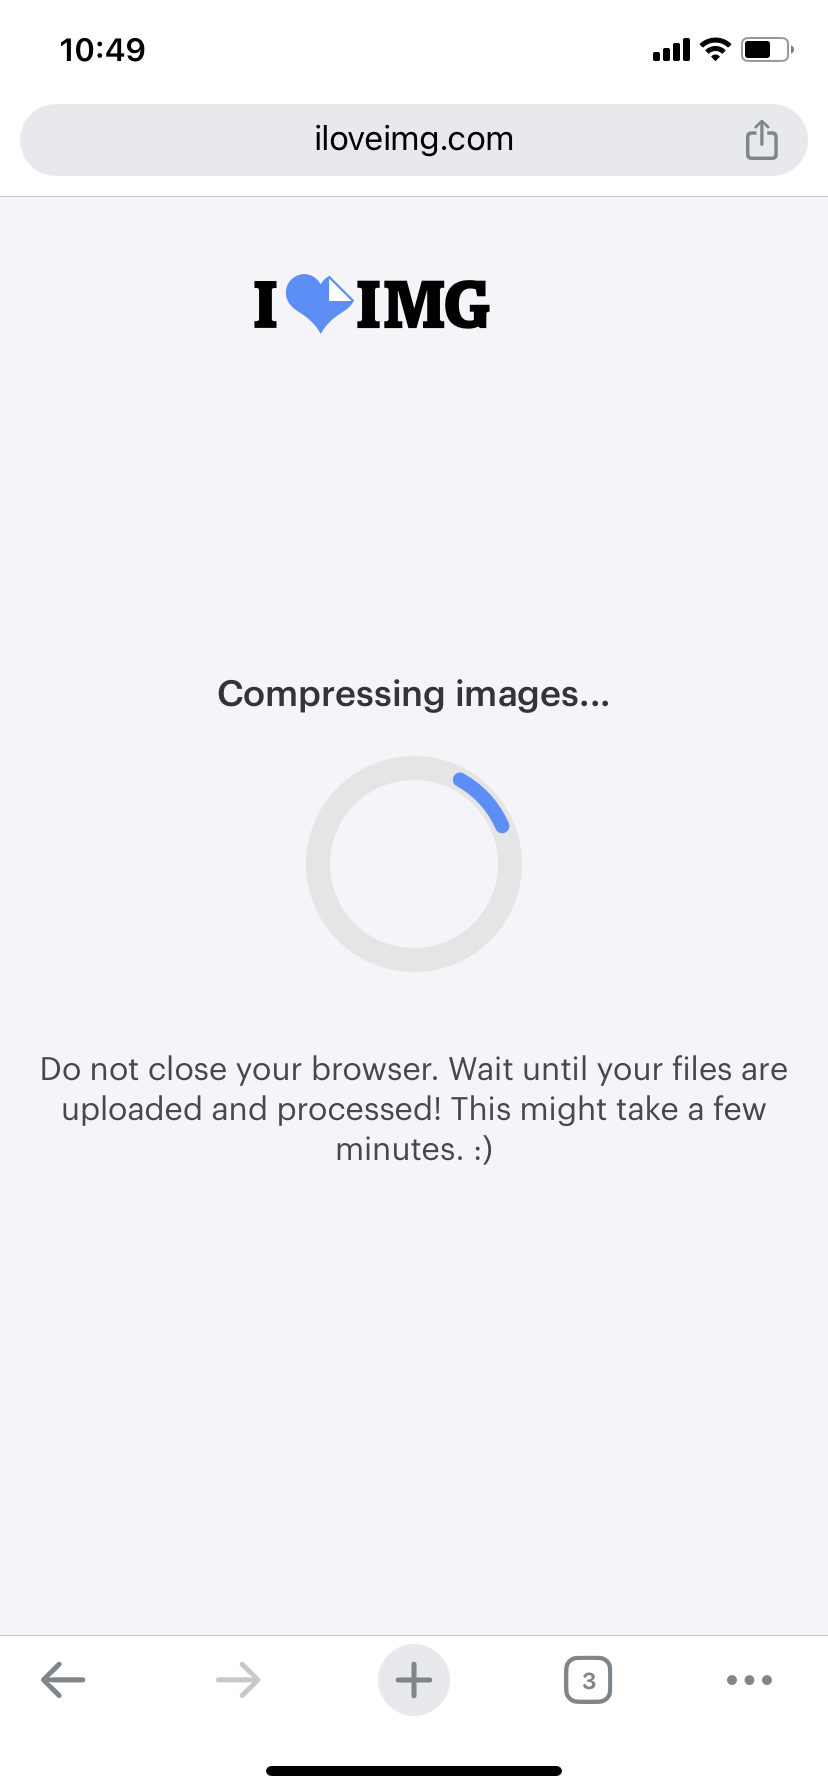 How To Compress Photos Online: Step 3